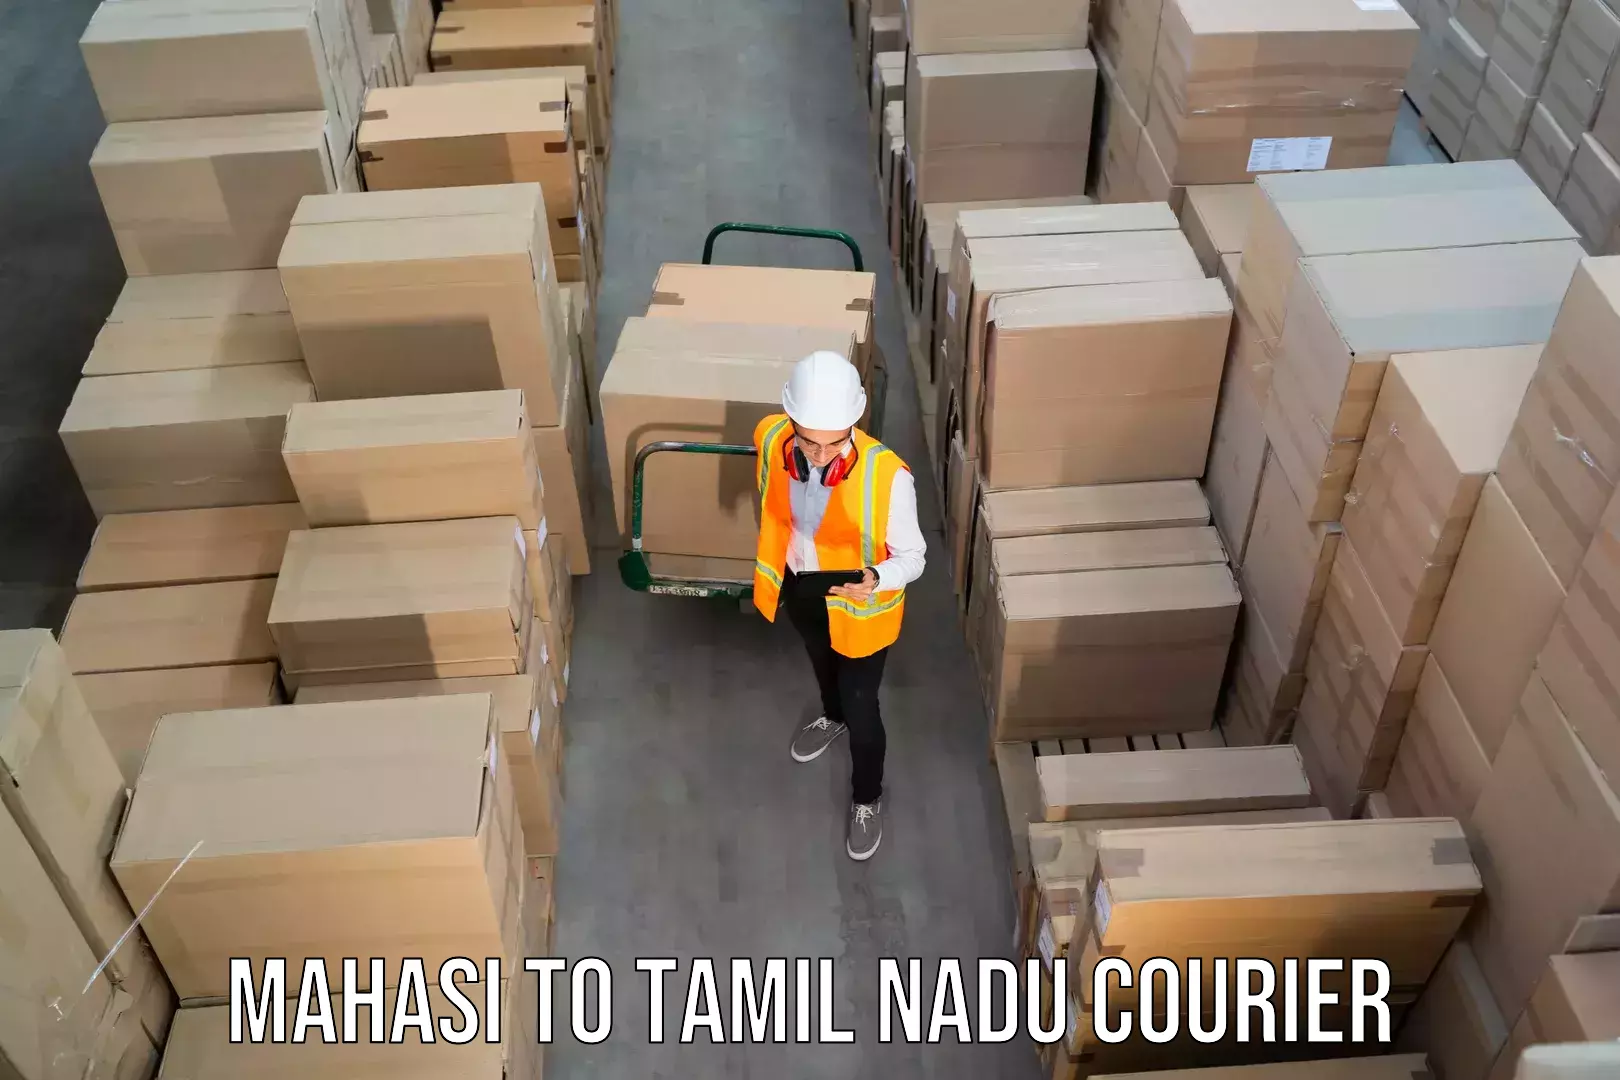 Multi-national courier services Mahasi to Sivaganga